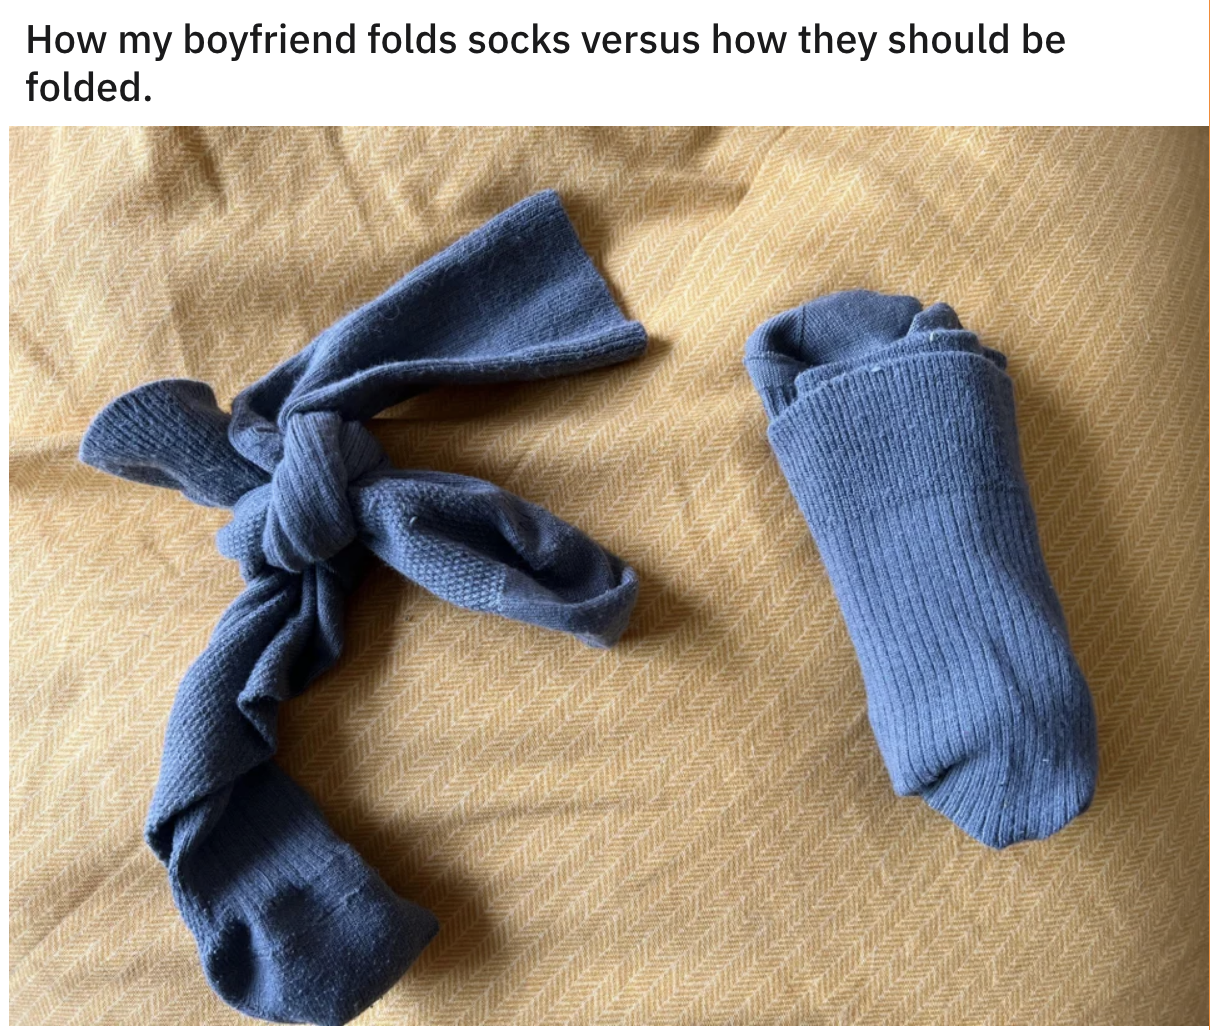 A pair of socks tied into a knot